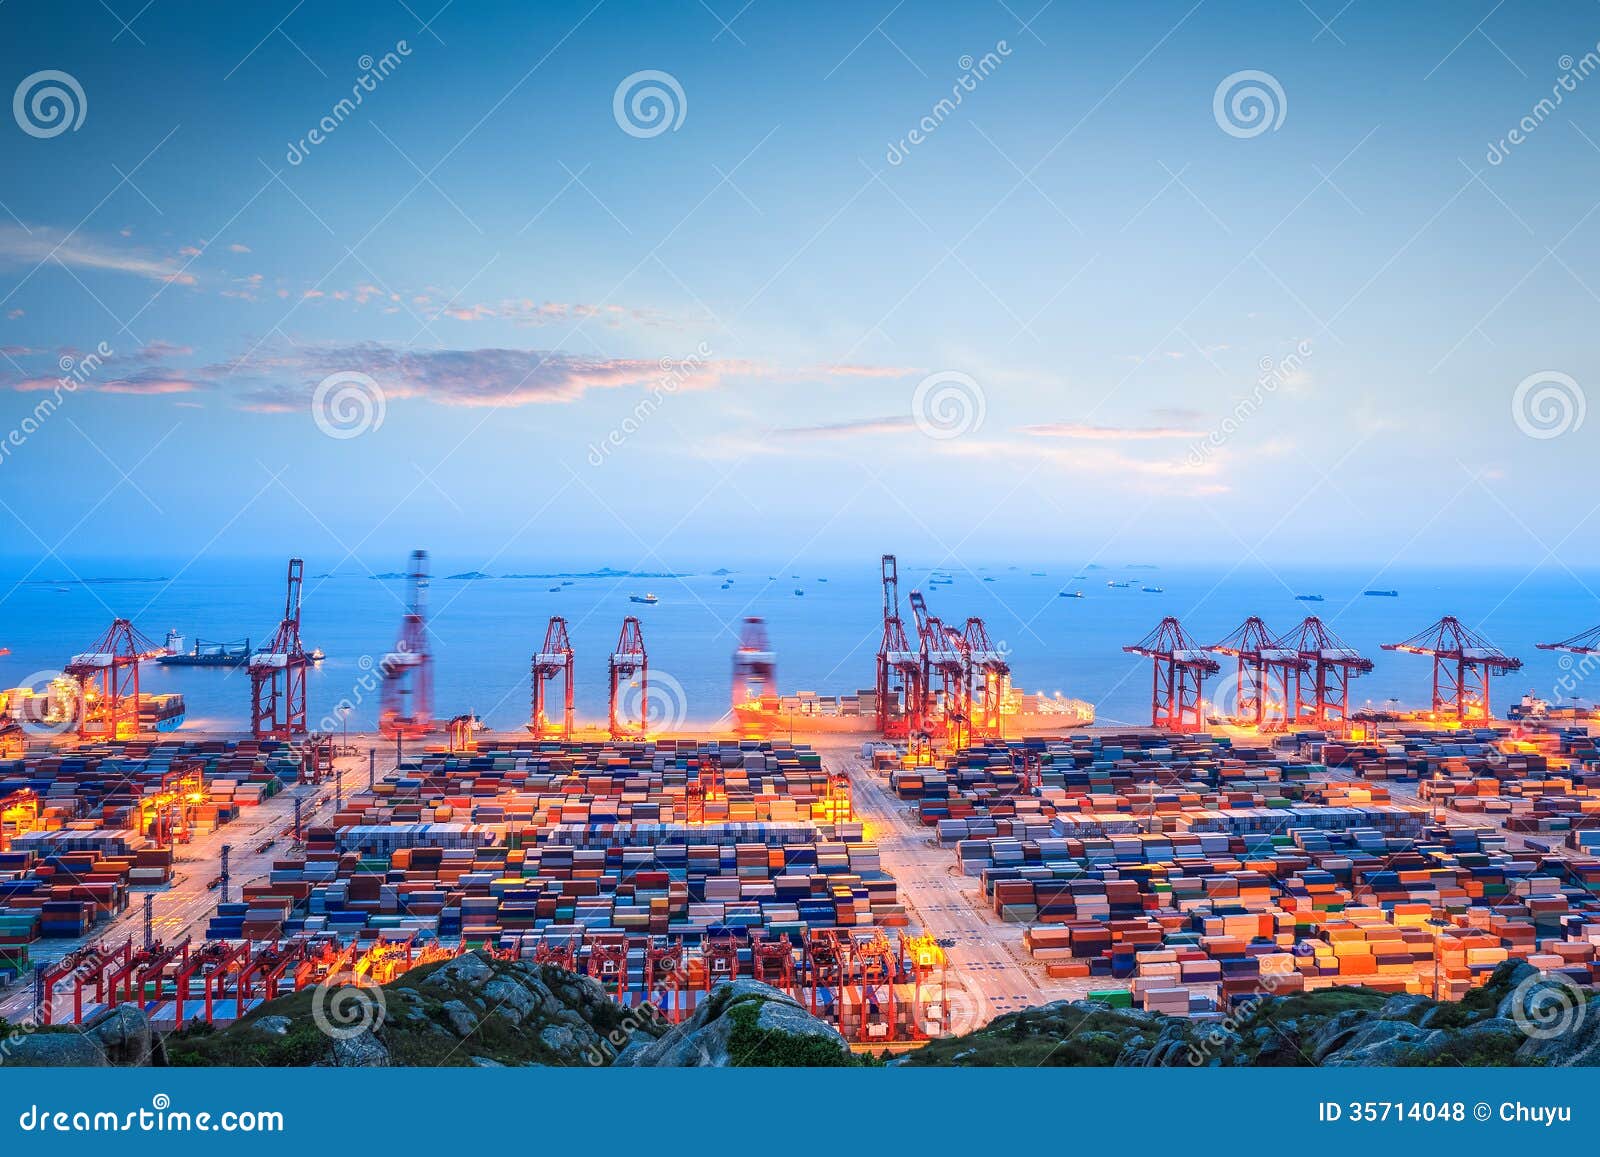 container terminal in twilight